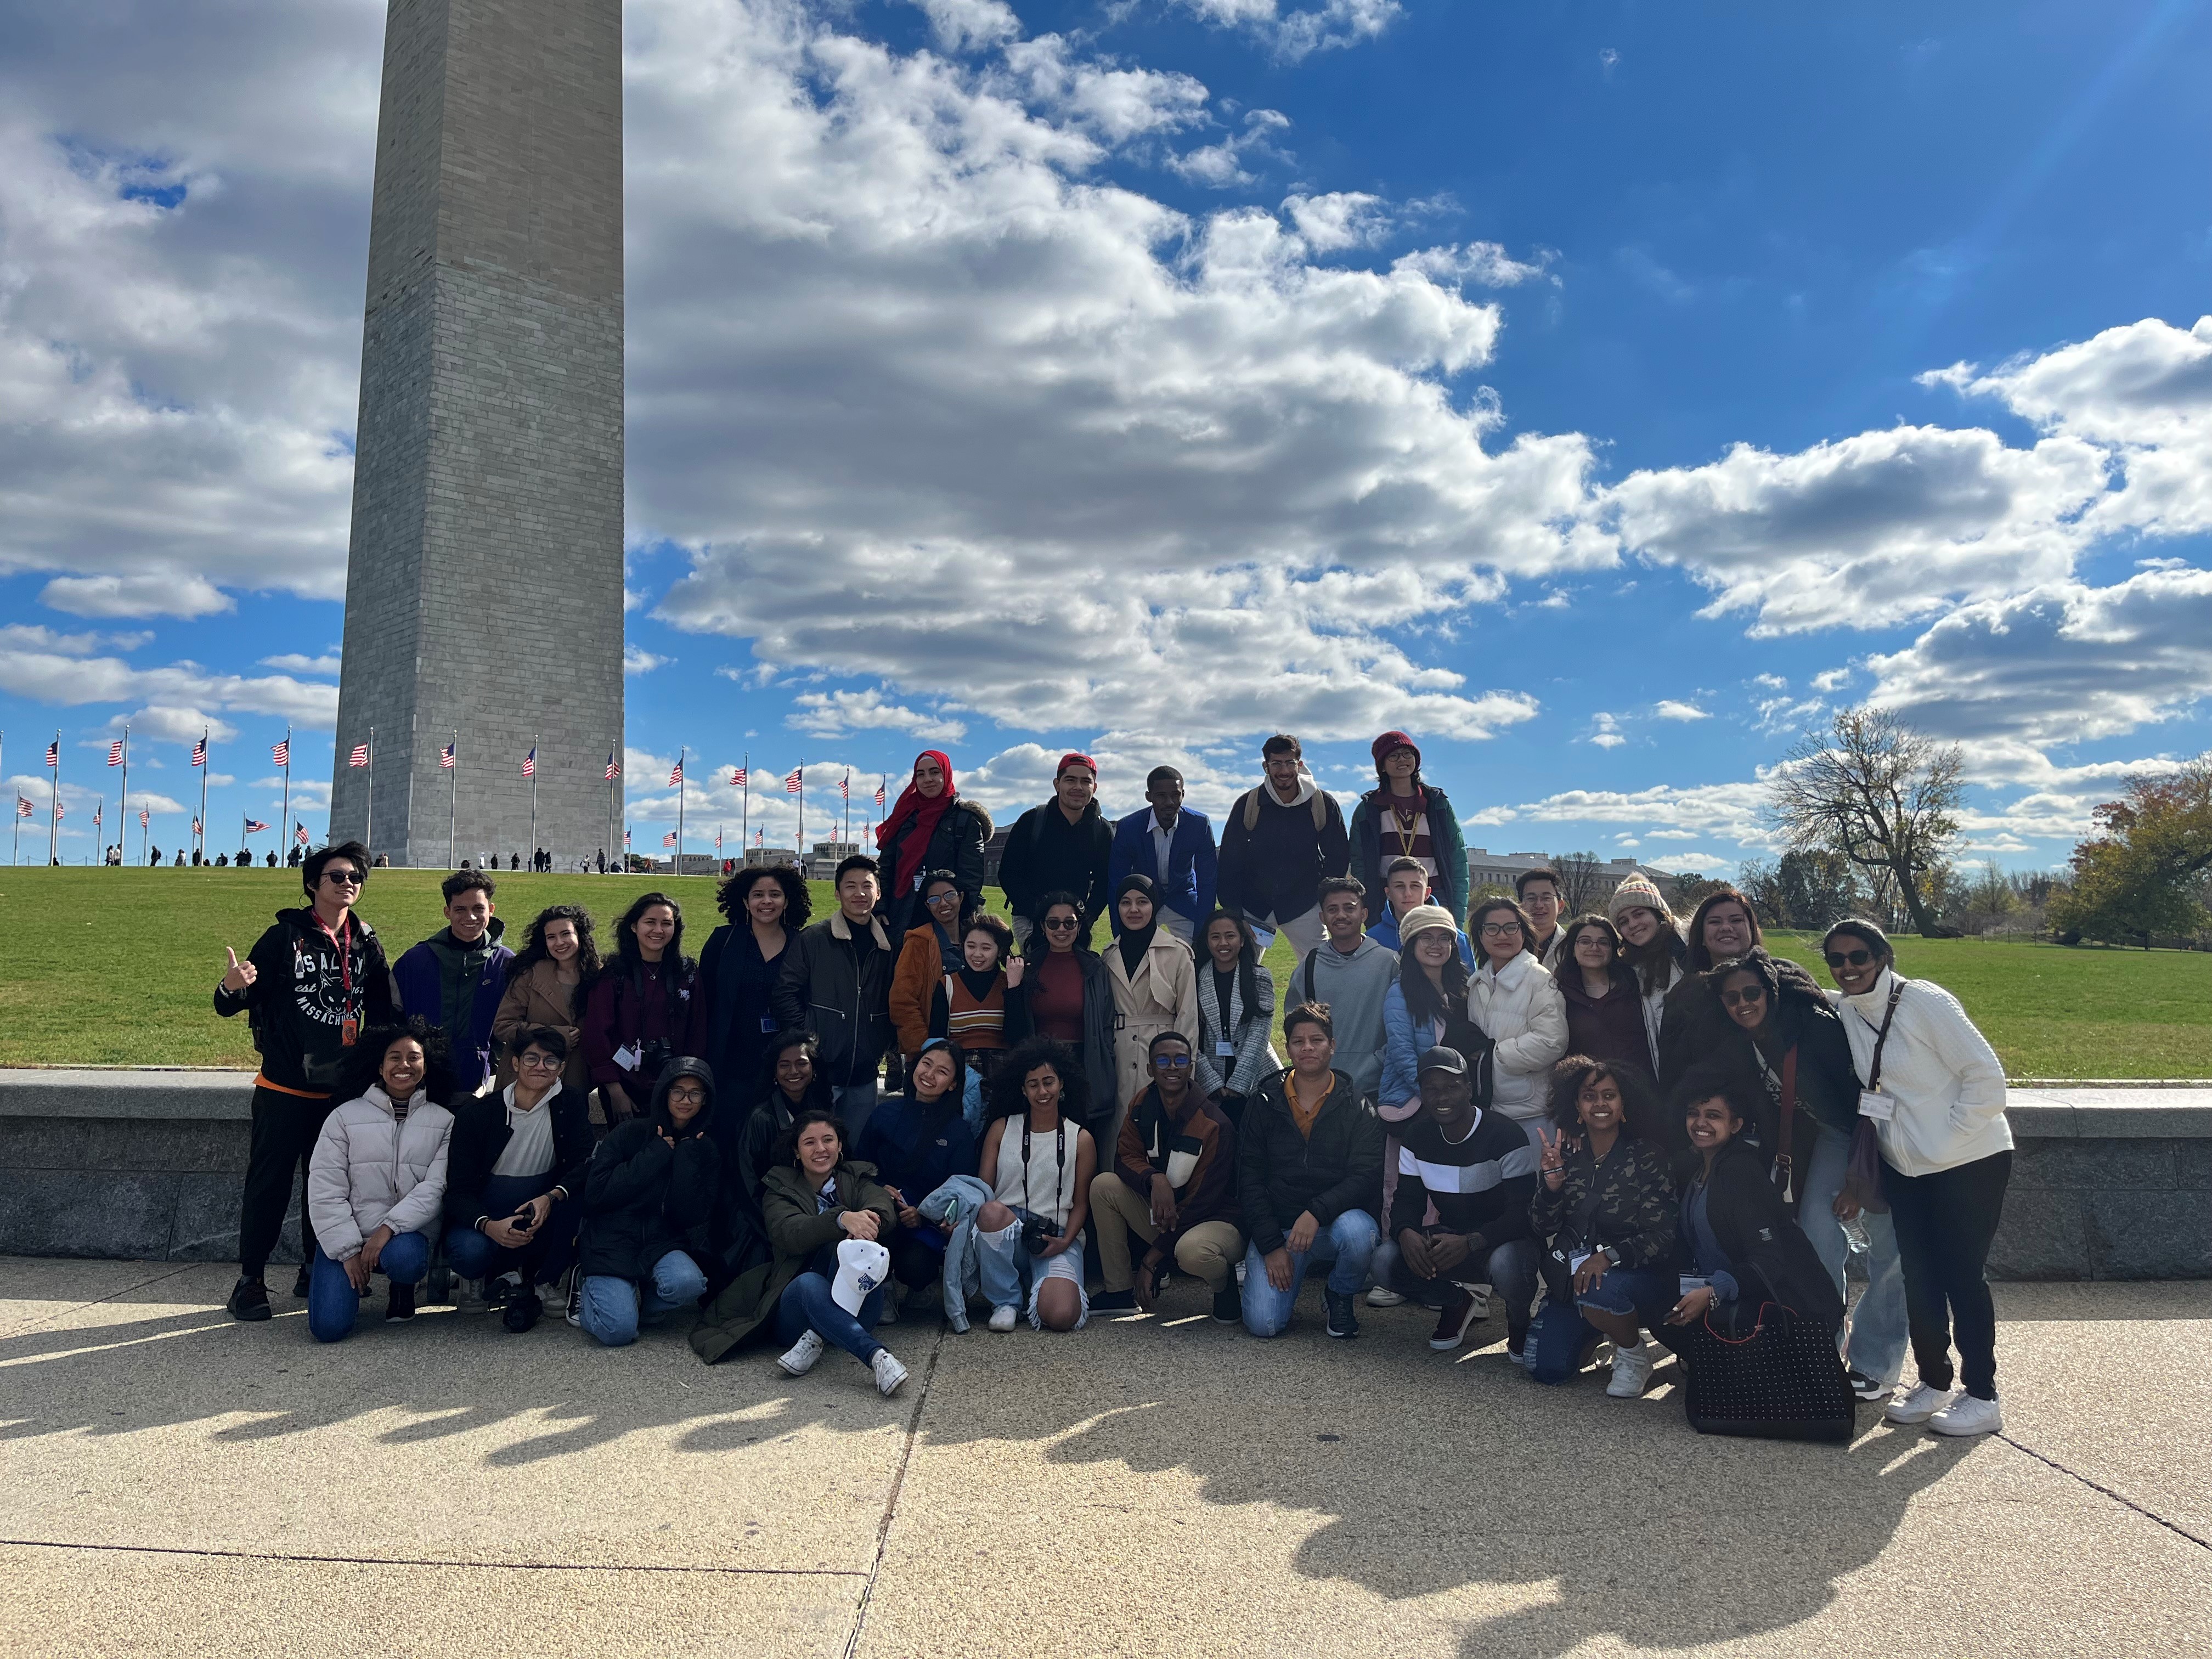 Group of about 30 students stand together in front of the Washington Monument